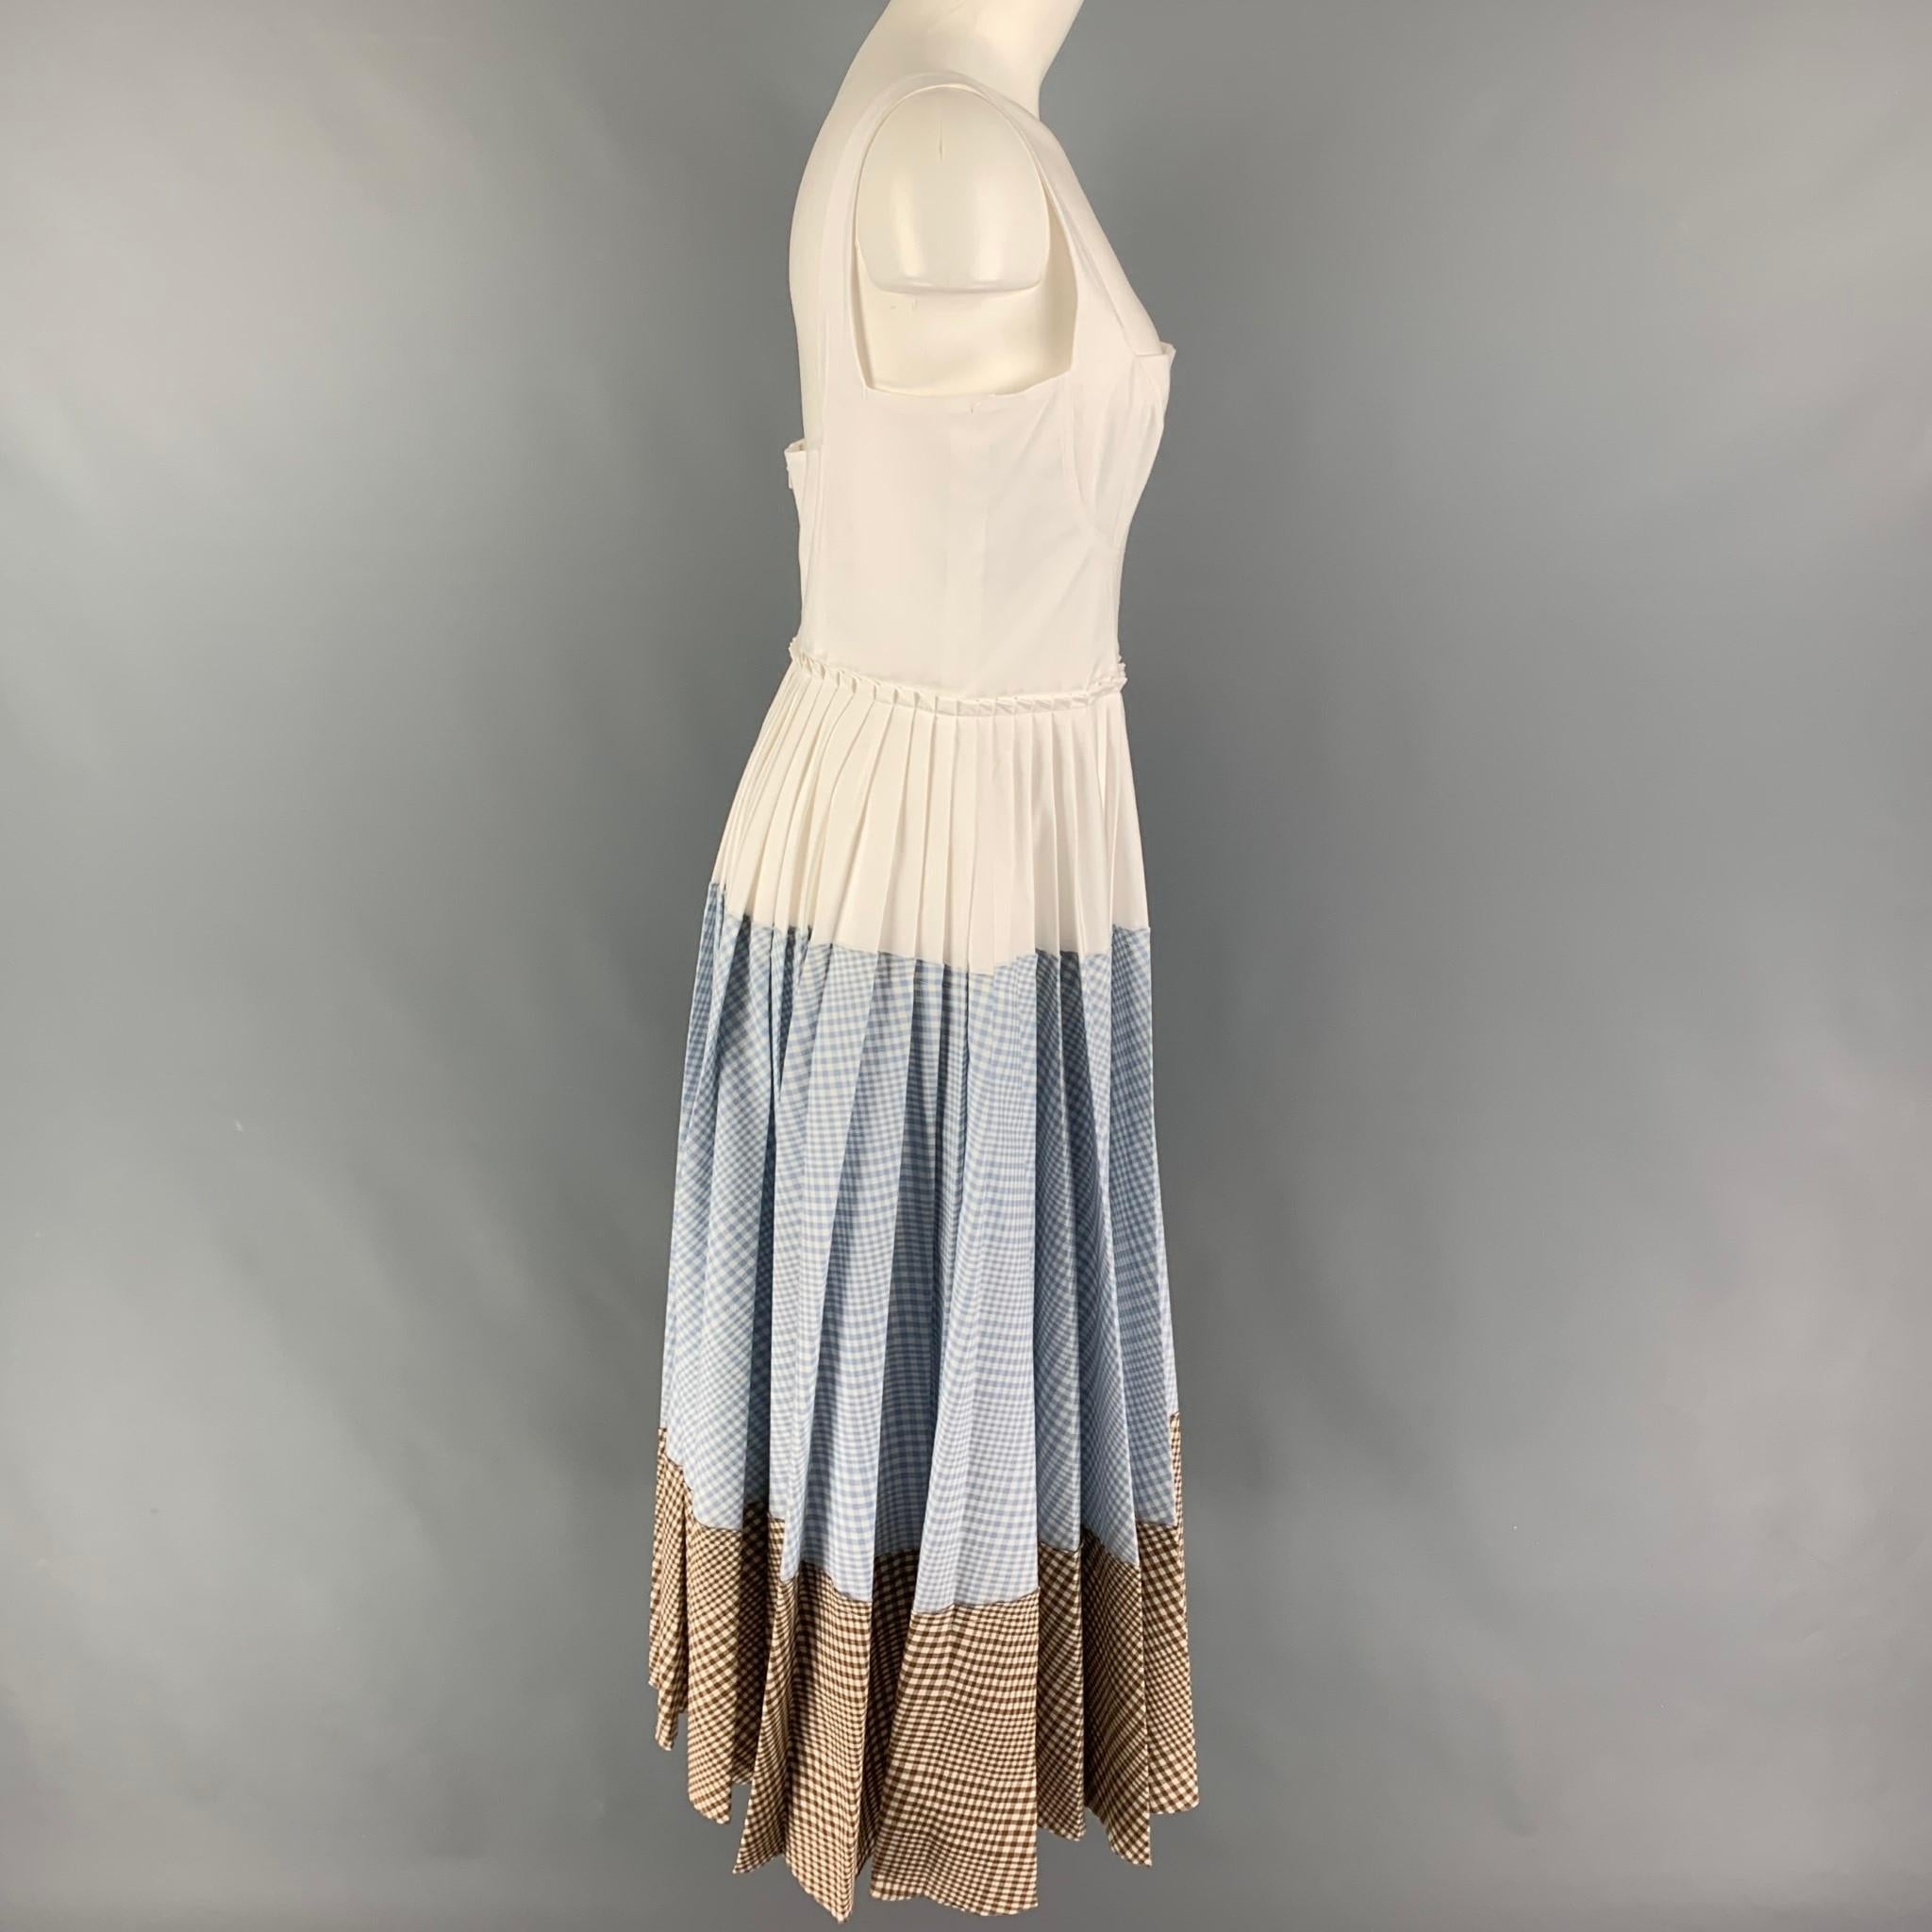 LELA ROSE 2019 dress comes in a white cotton with a blue & brown gingham print design featuring a pleated style, sleeveless, and a back zip up closure. Made in USA. 

Very Good Pre-Owned Condition.
Marked: 8
Original Retail Price: